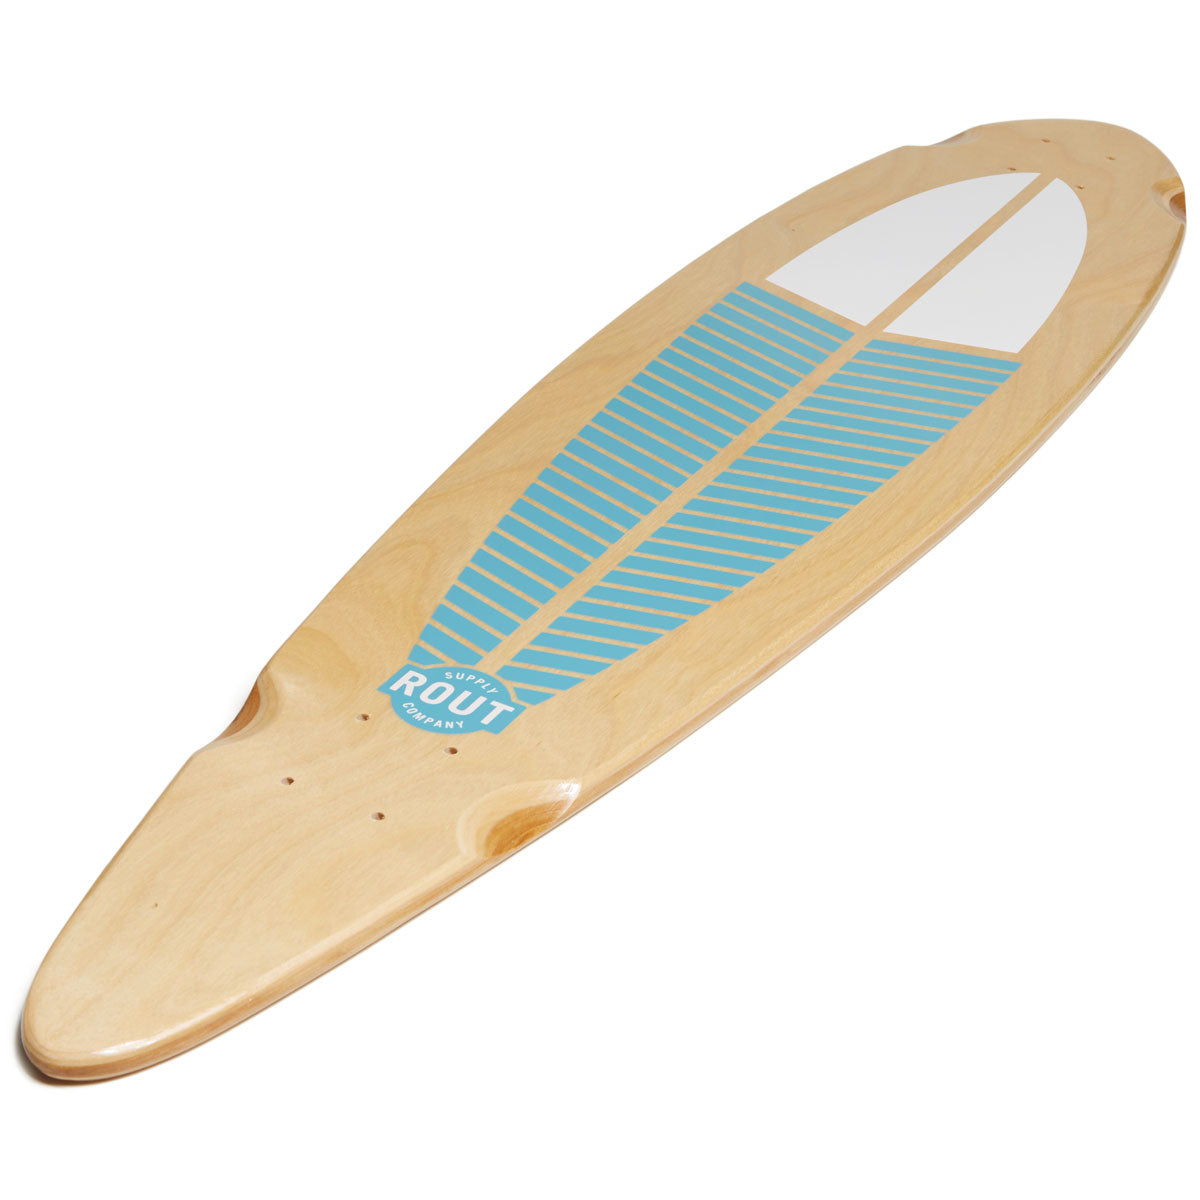 Rout Plume Pintail Longboard Deck image 4